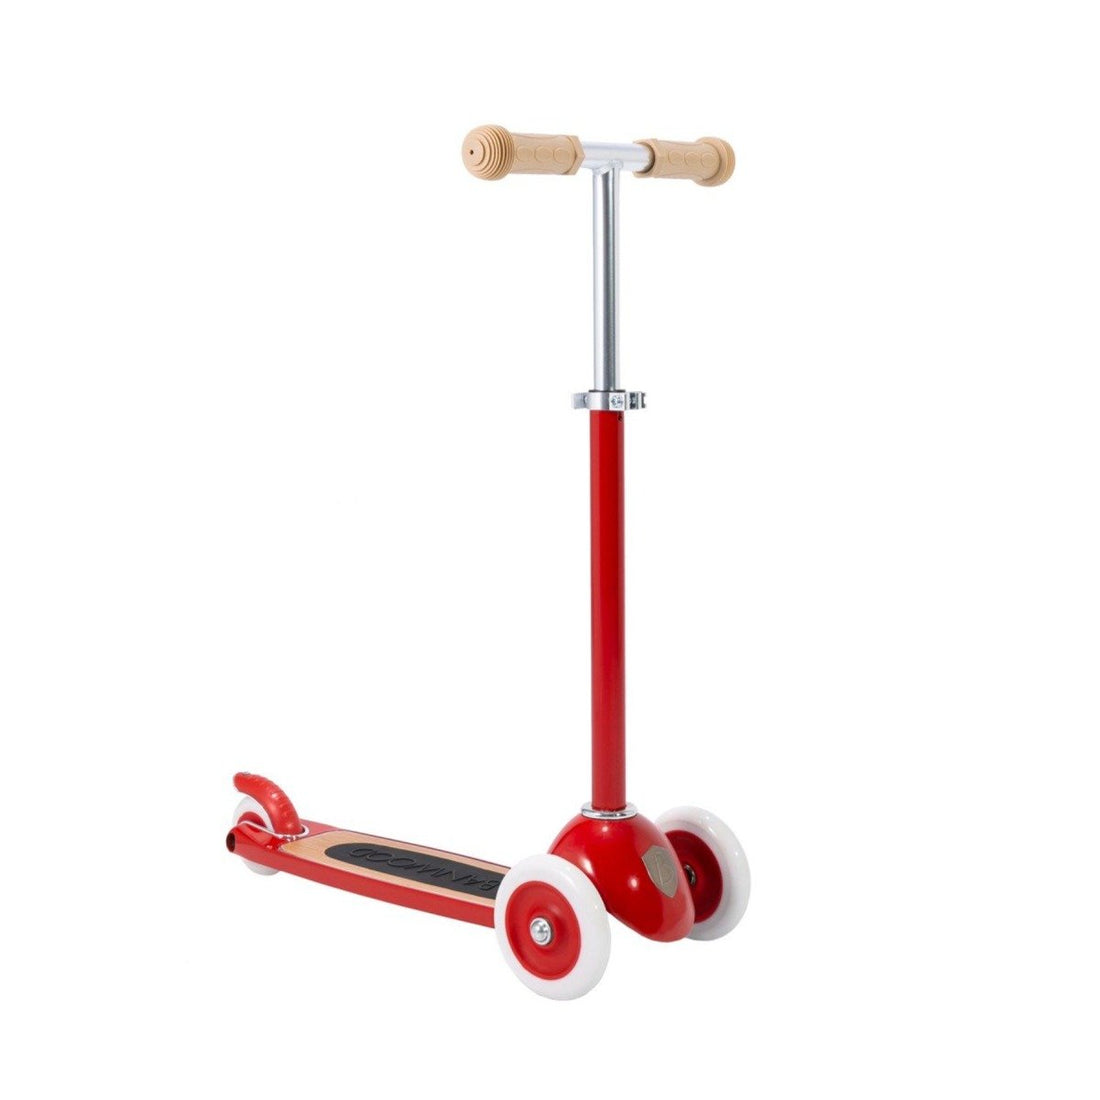 Banwood Scooter with Basket - Red